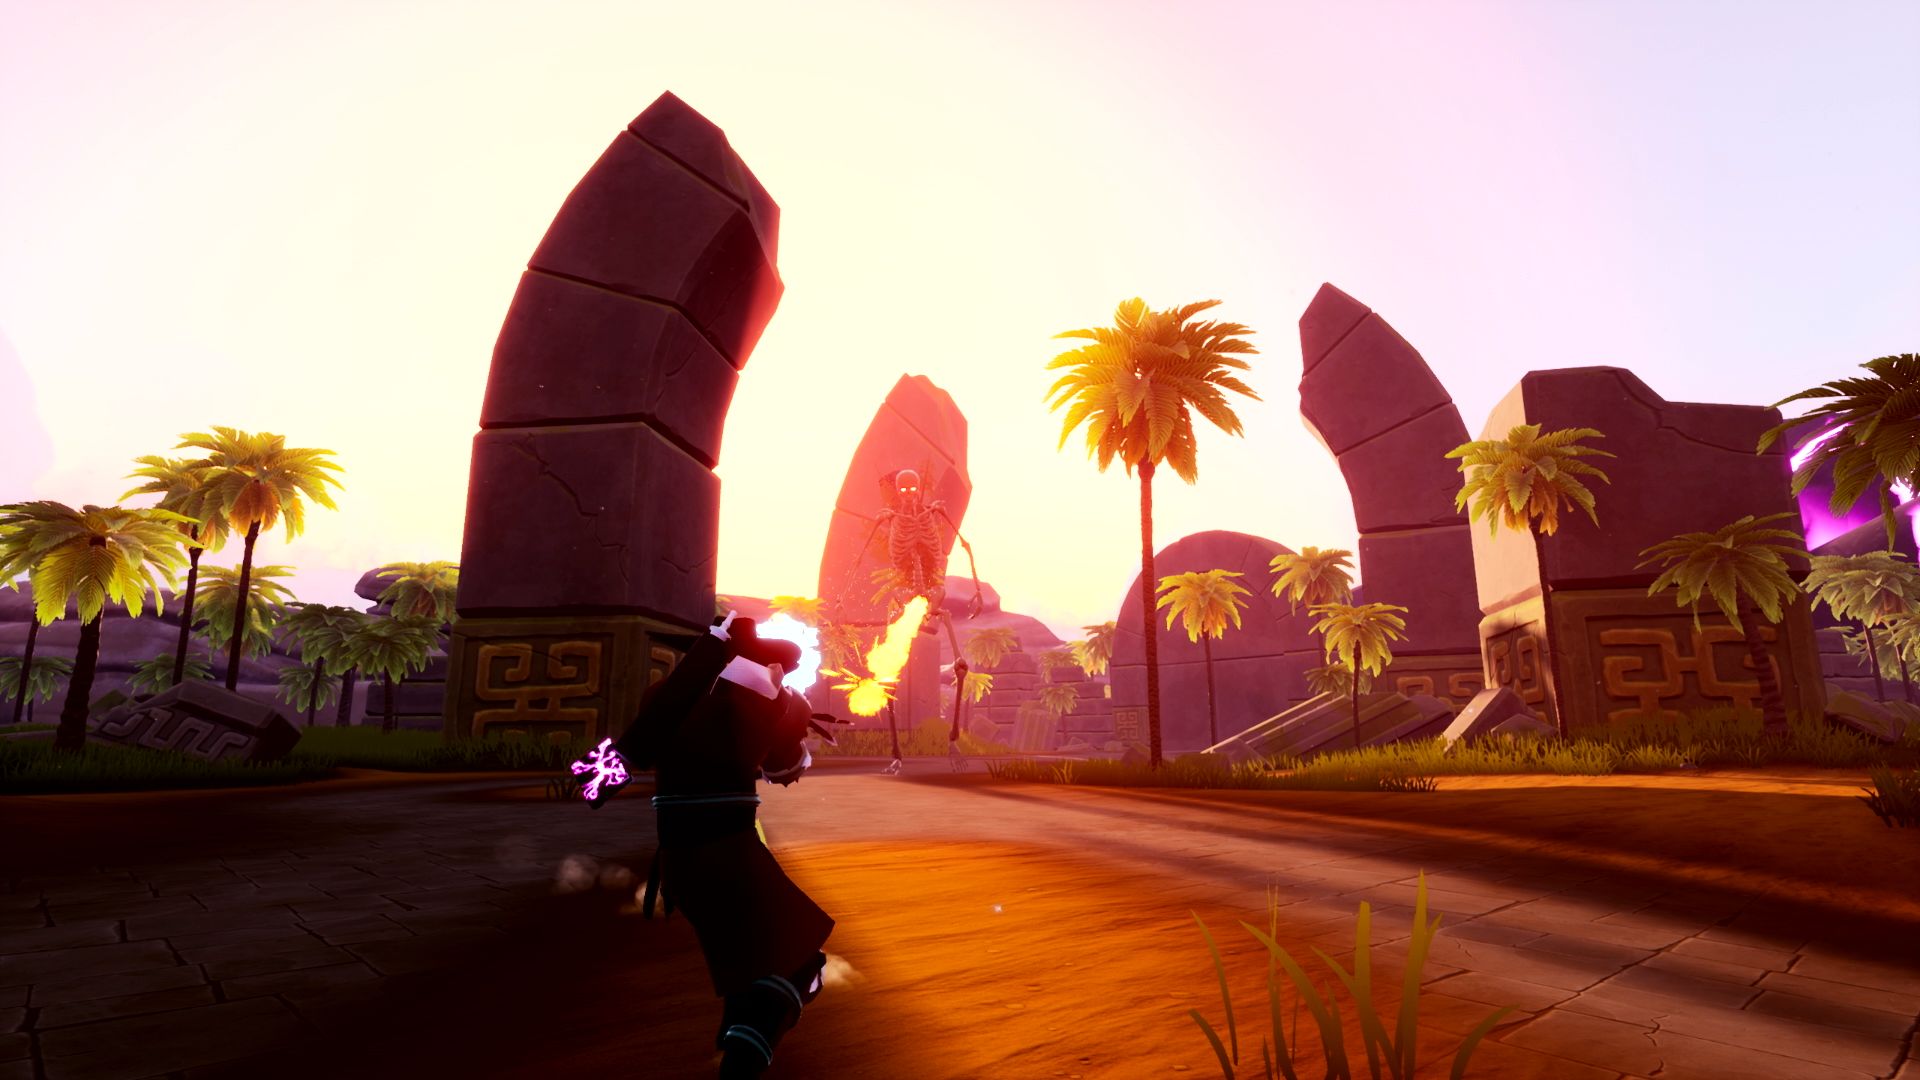 Holomento screenshot of a character shooting fire at a giant skeleton among ruins and palm trees at sunset.